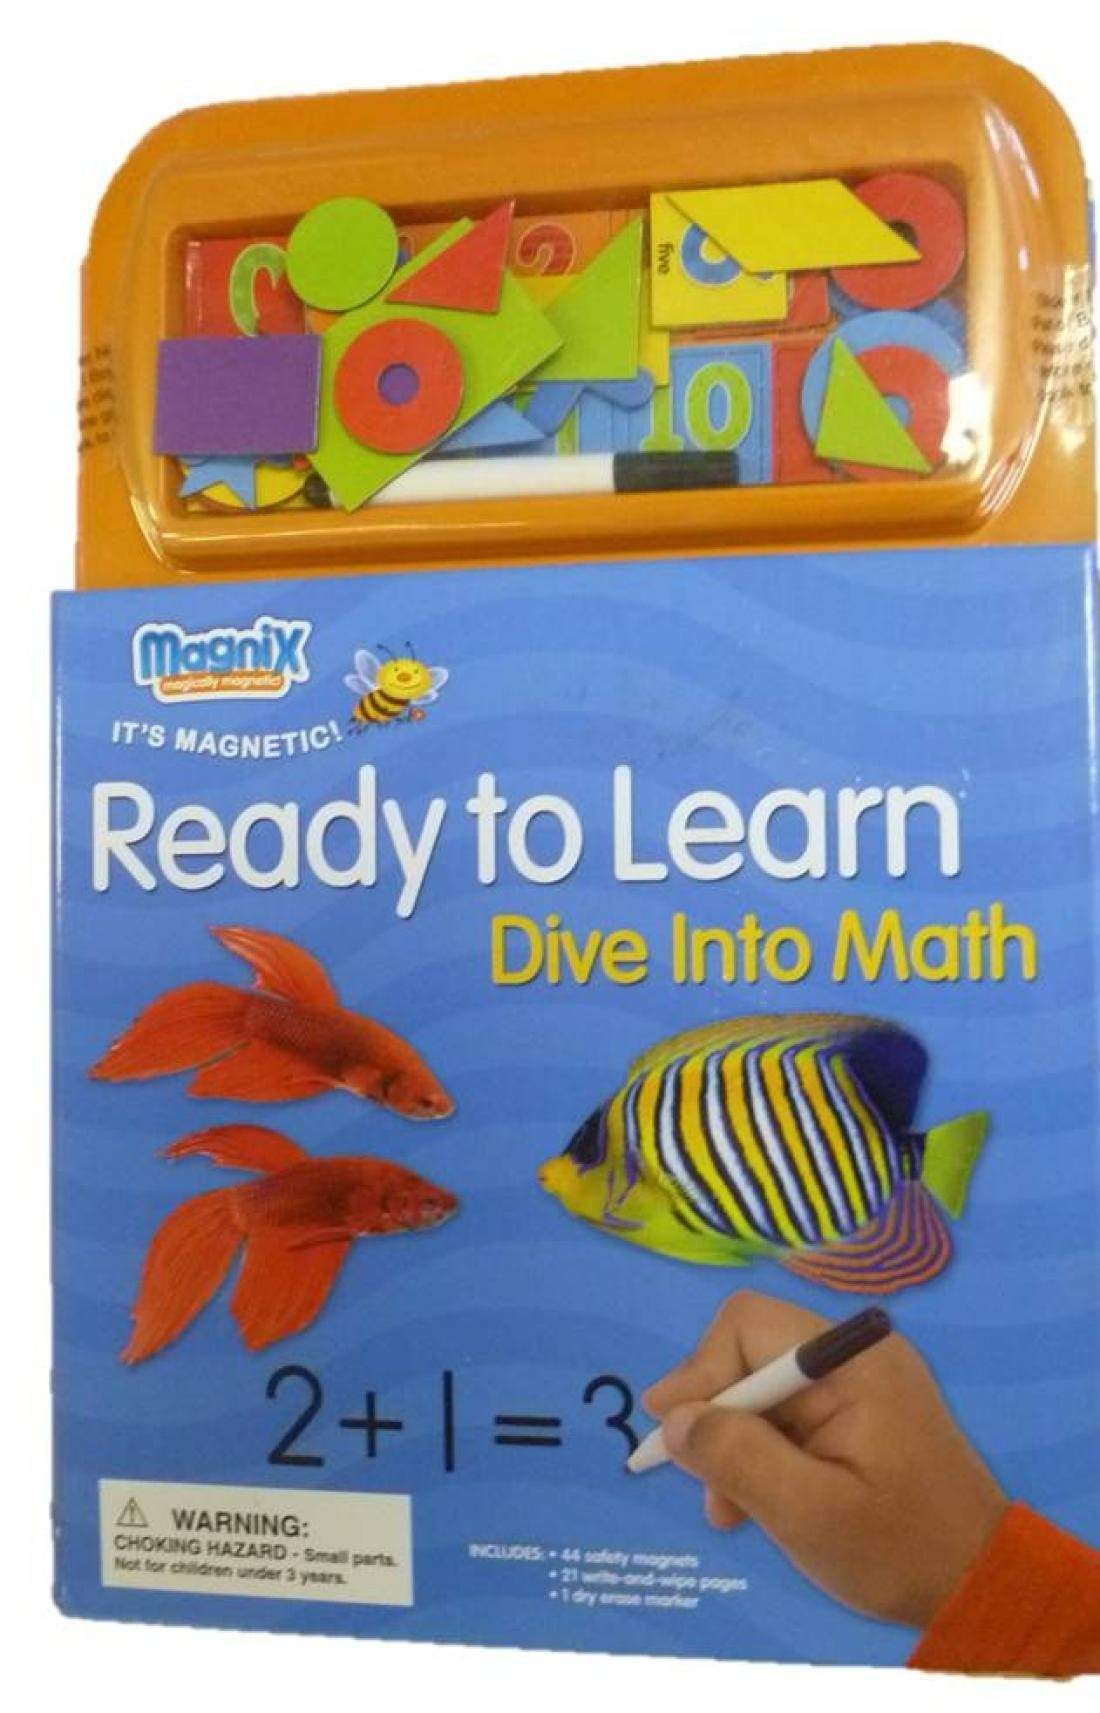 Magnix: Ready To Learn Dive Into Math